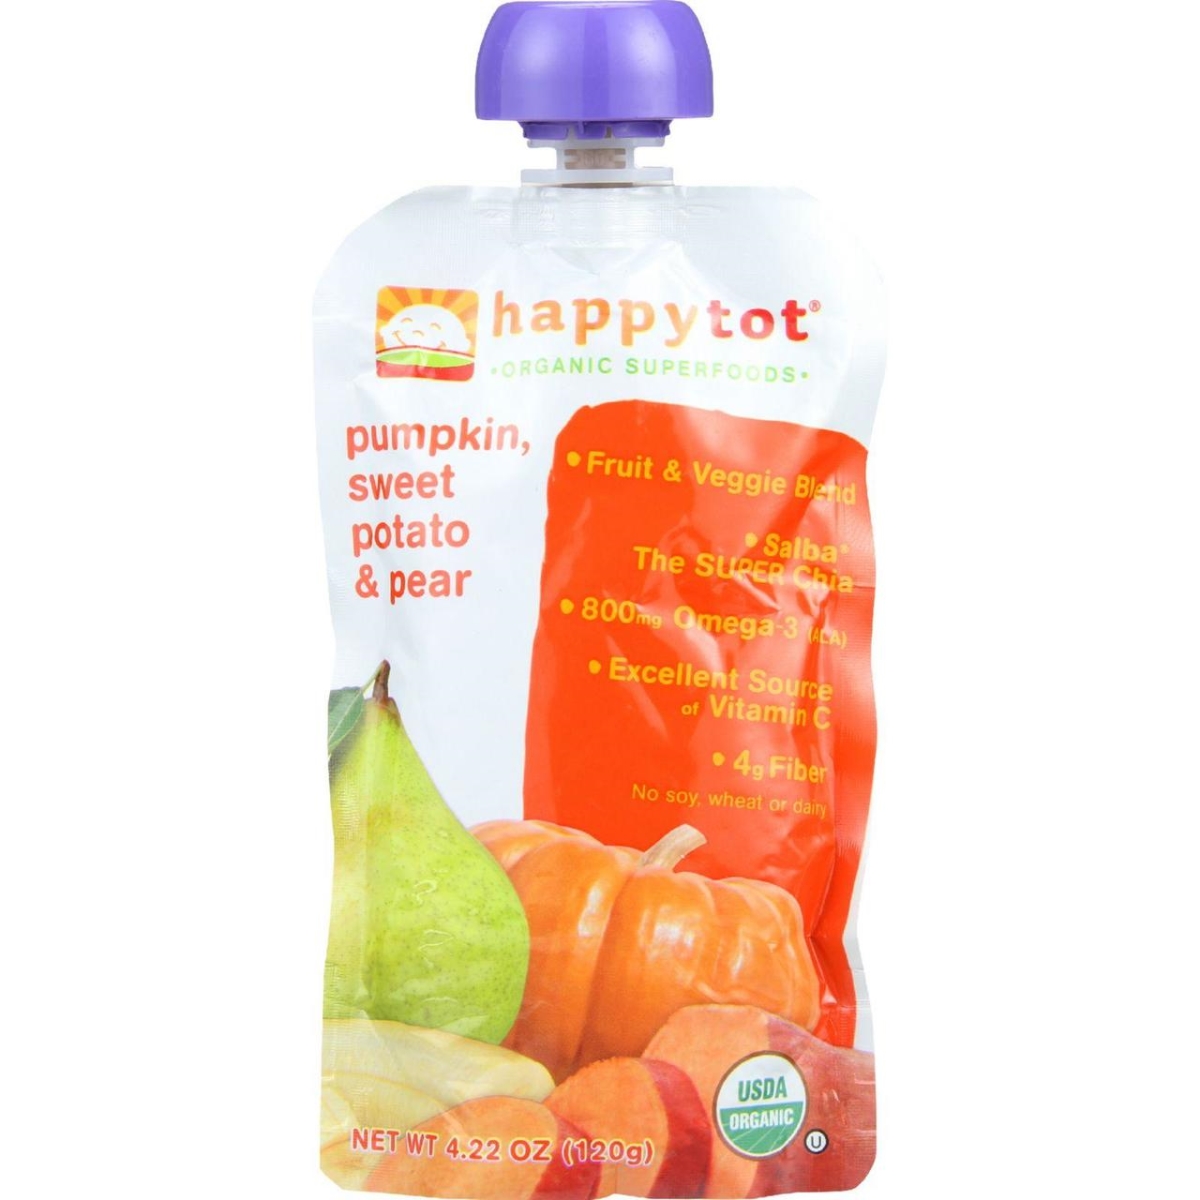 Picture of Happy Tot HG1251255 4.22 oz Organic Stage 4 Pumpkin Sweet Potato & Pear Toddler Food - Case of 16